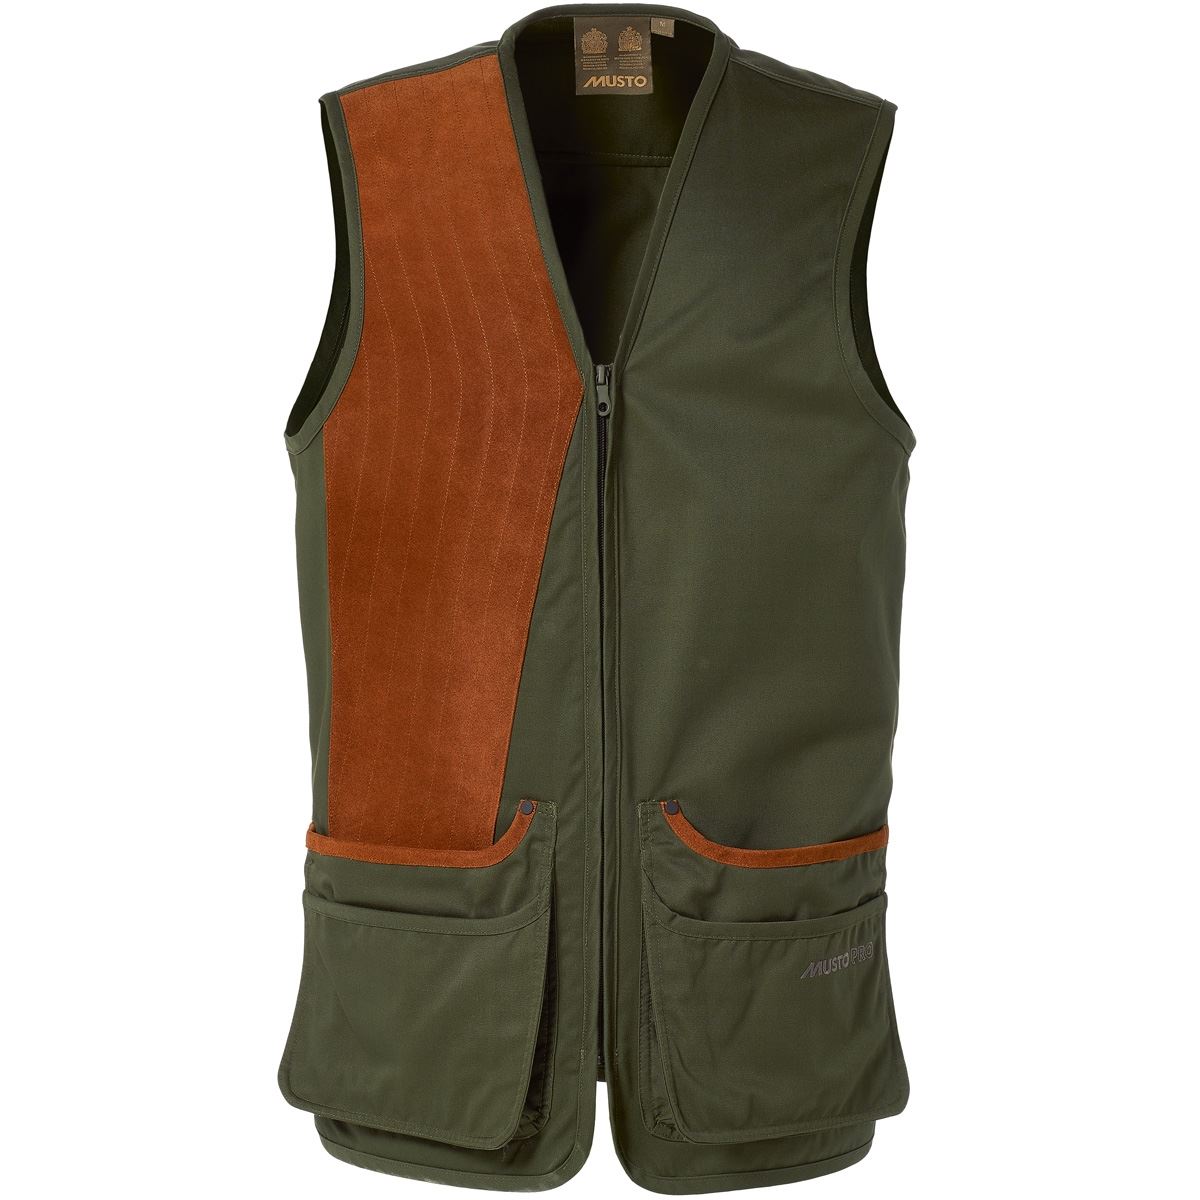 What extra durability does the Musto shooting vest offer?